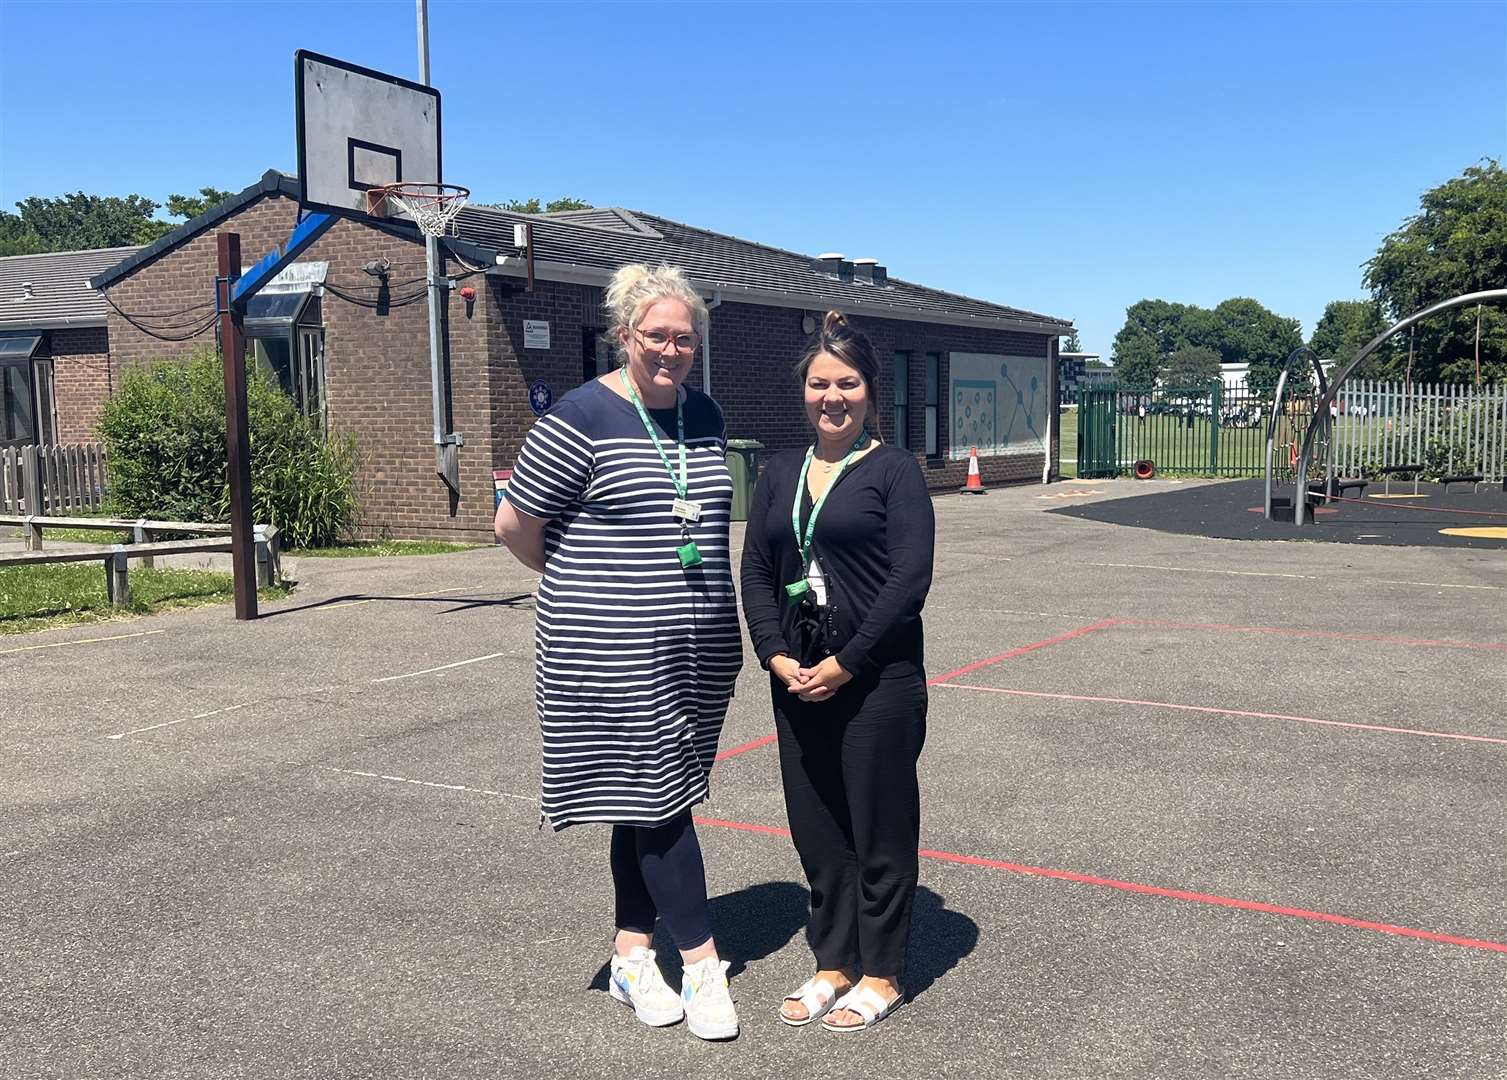 Becky Wood and Holly King saved a pupil's life during a lunchbreak St Mary of Charity Primary School in Faversham